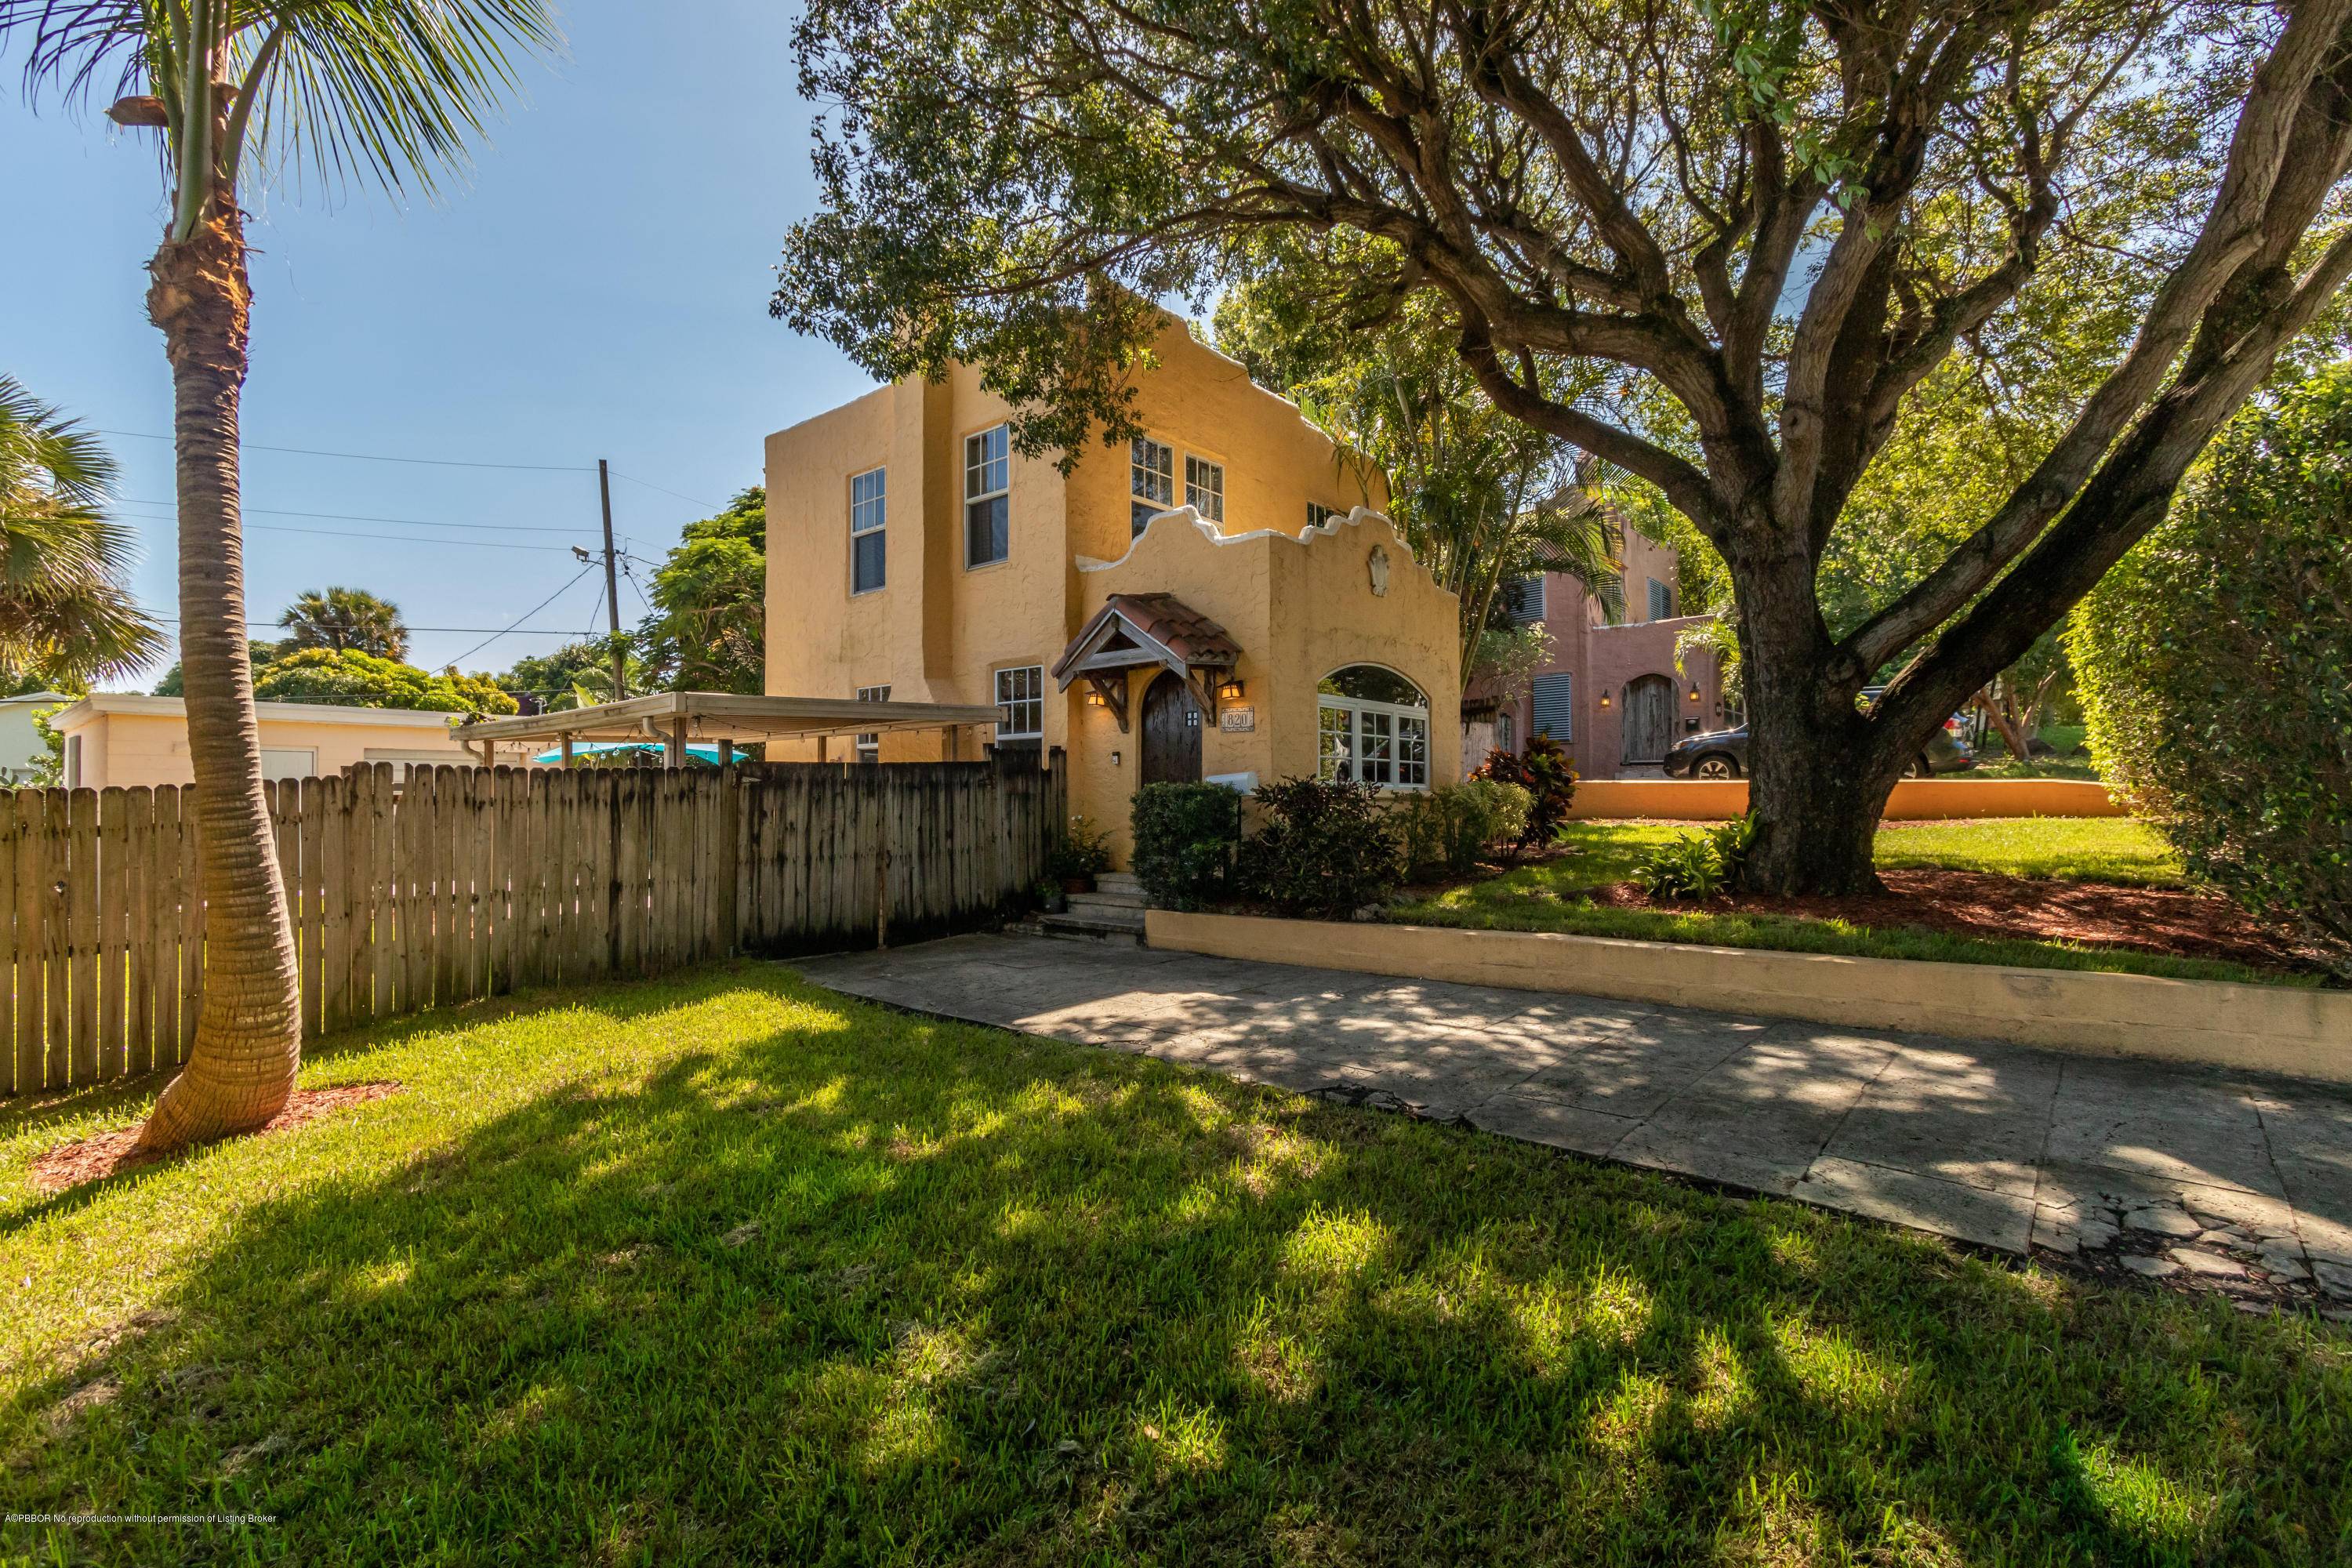 This completely renovated, two story Spanish style, three bedroom historic home sits on an extra large lot with a double garage near downtown West Palm Beach.